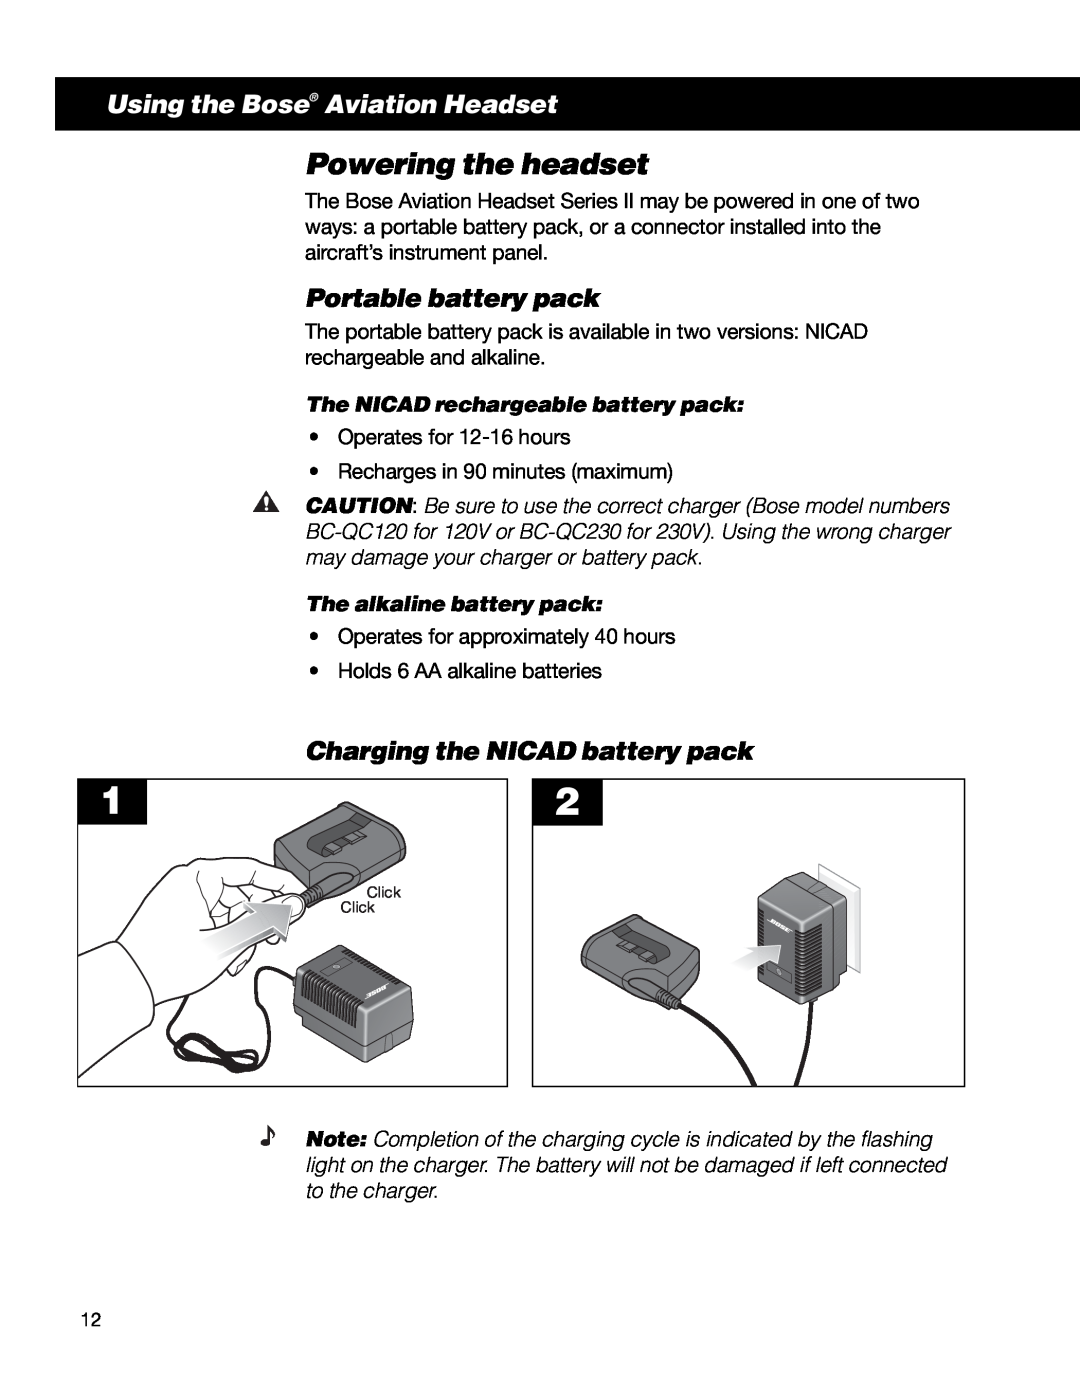 Bose II Powering the headset, Portable battery pack, Charging the NICAD battery pack, The NICAD rechargeable battery pack 